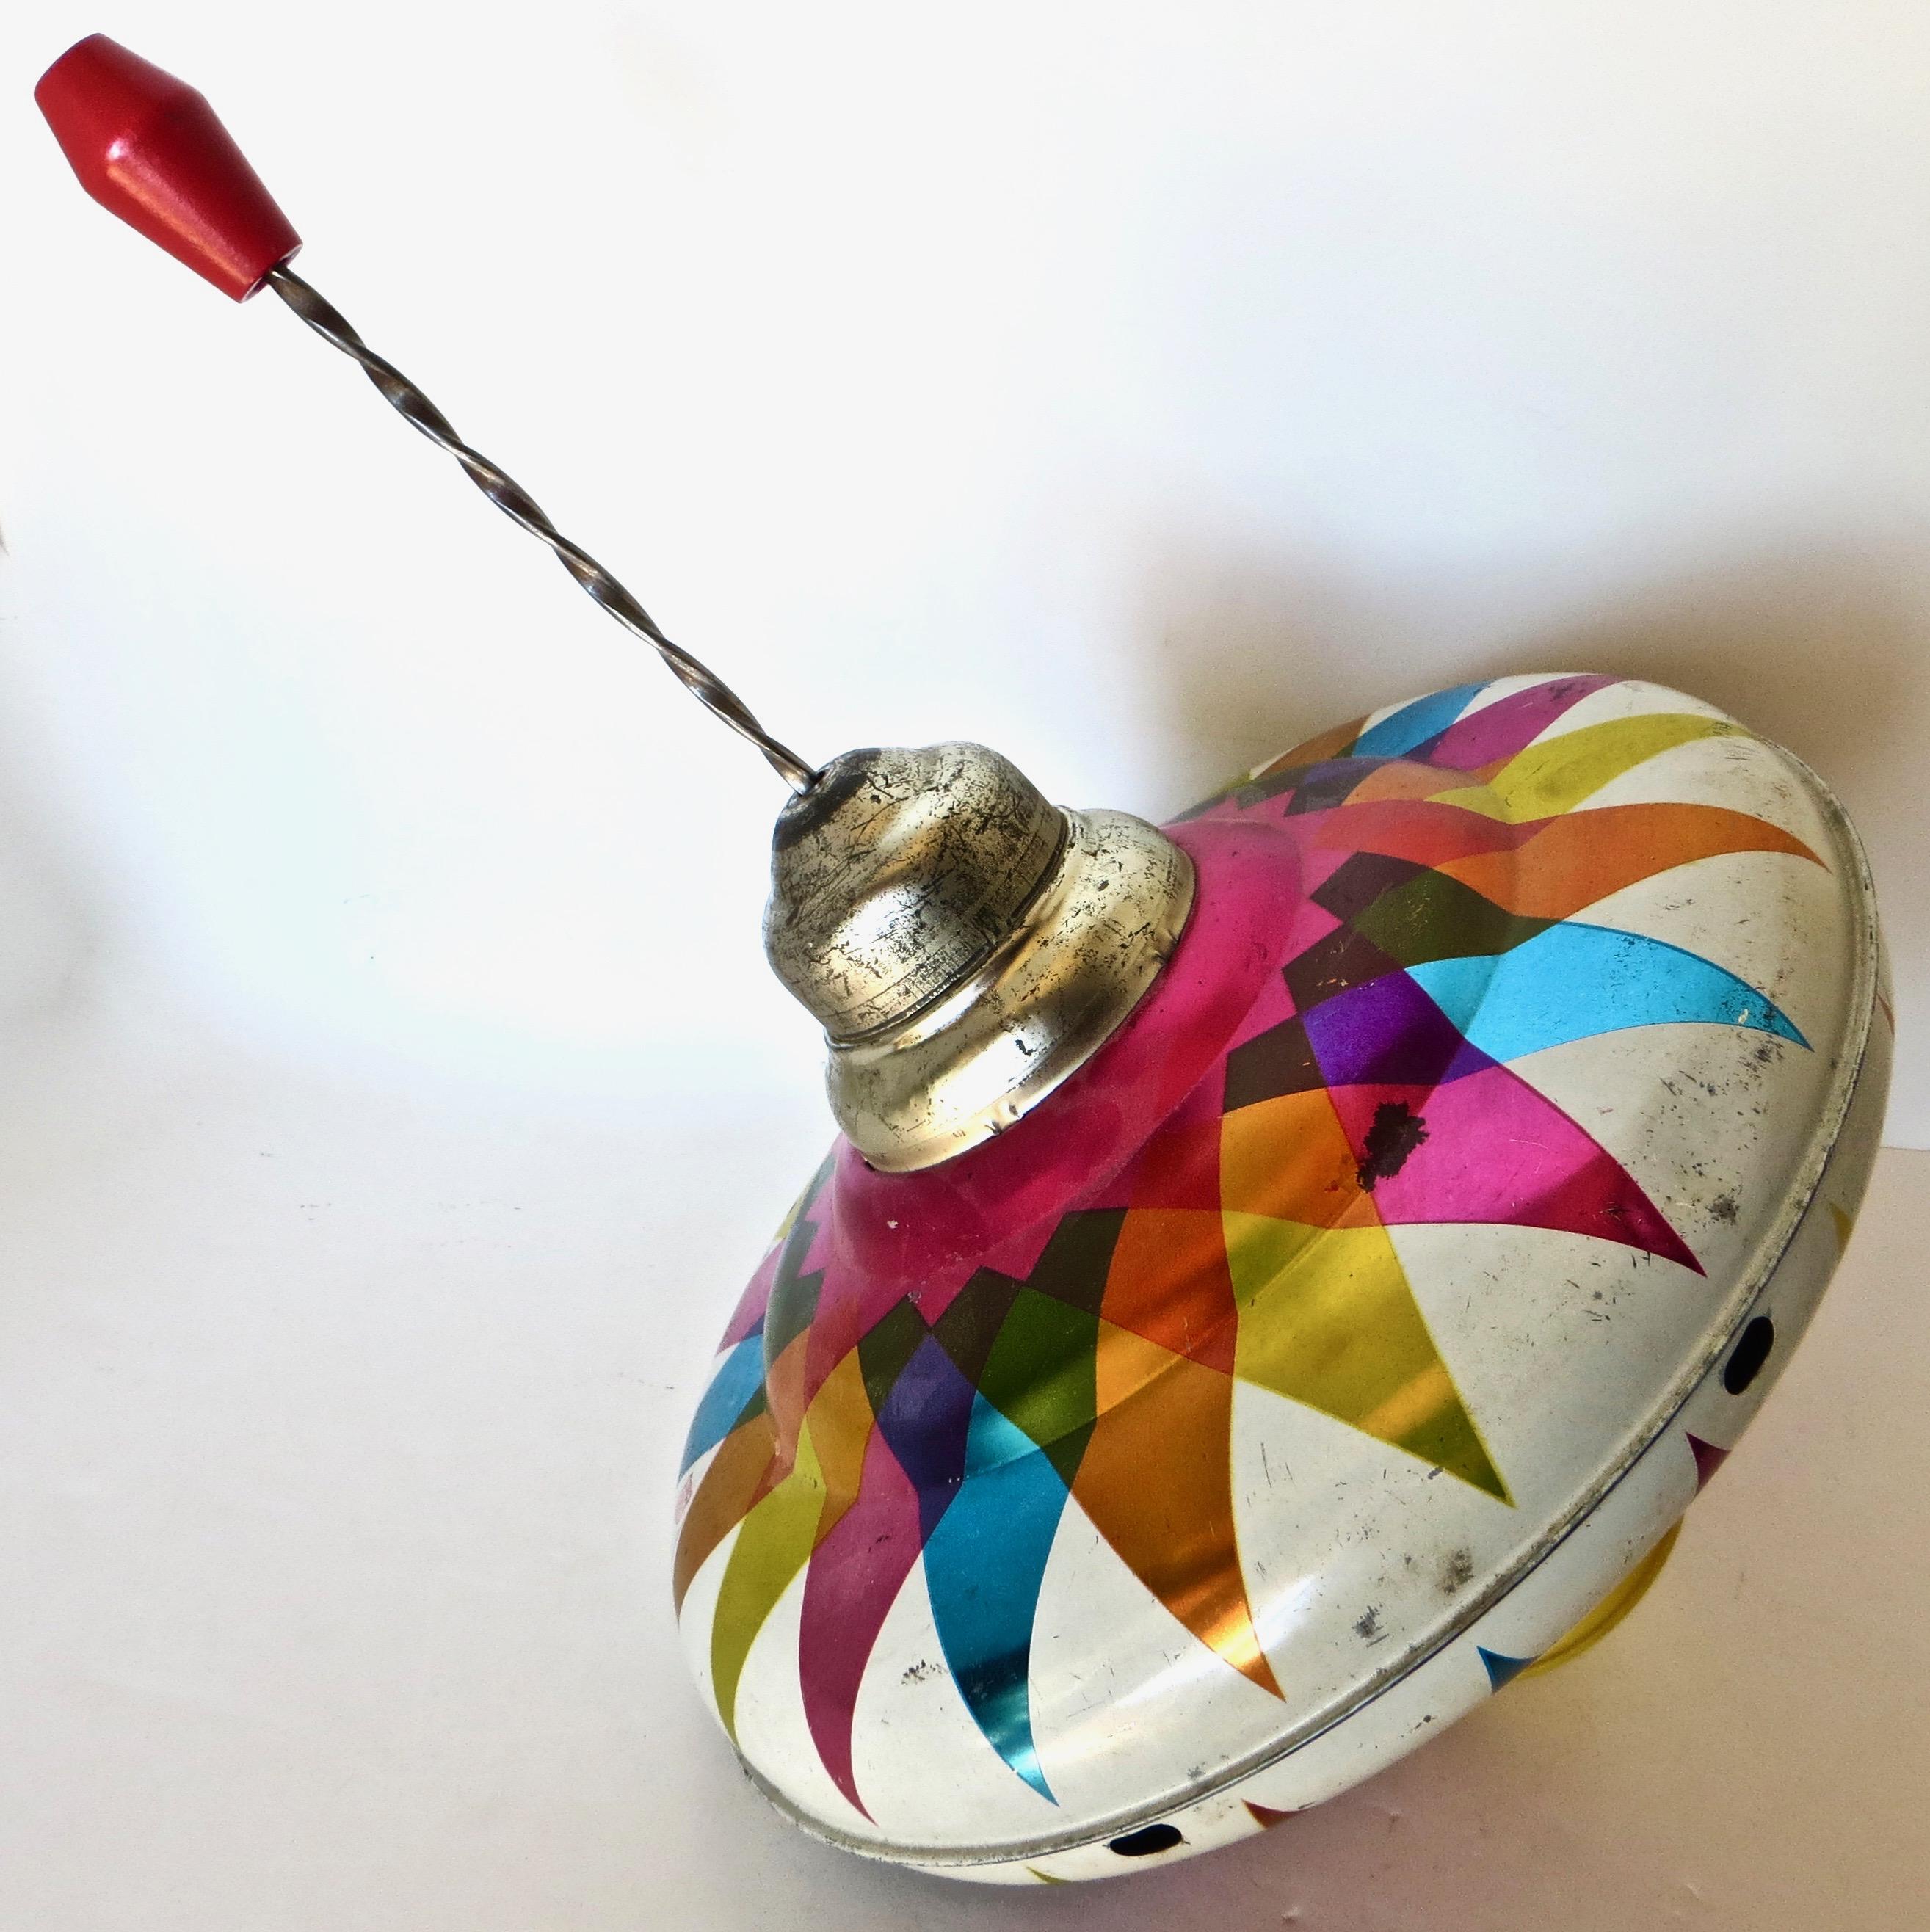 Folk Art Vintage Child's Toy Tin Large Spinning Top by Chein Company, American, Ca. 1950 For Sale